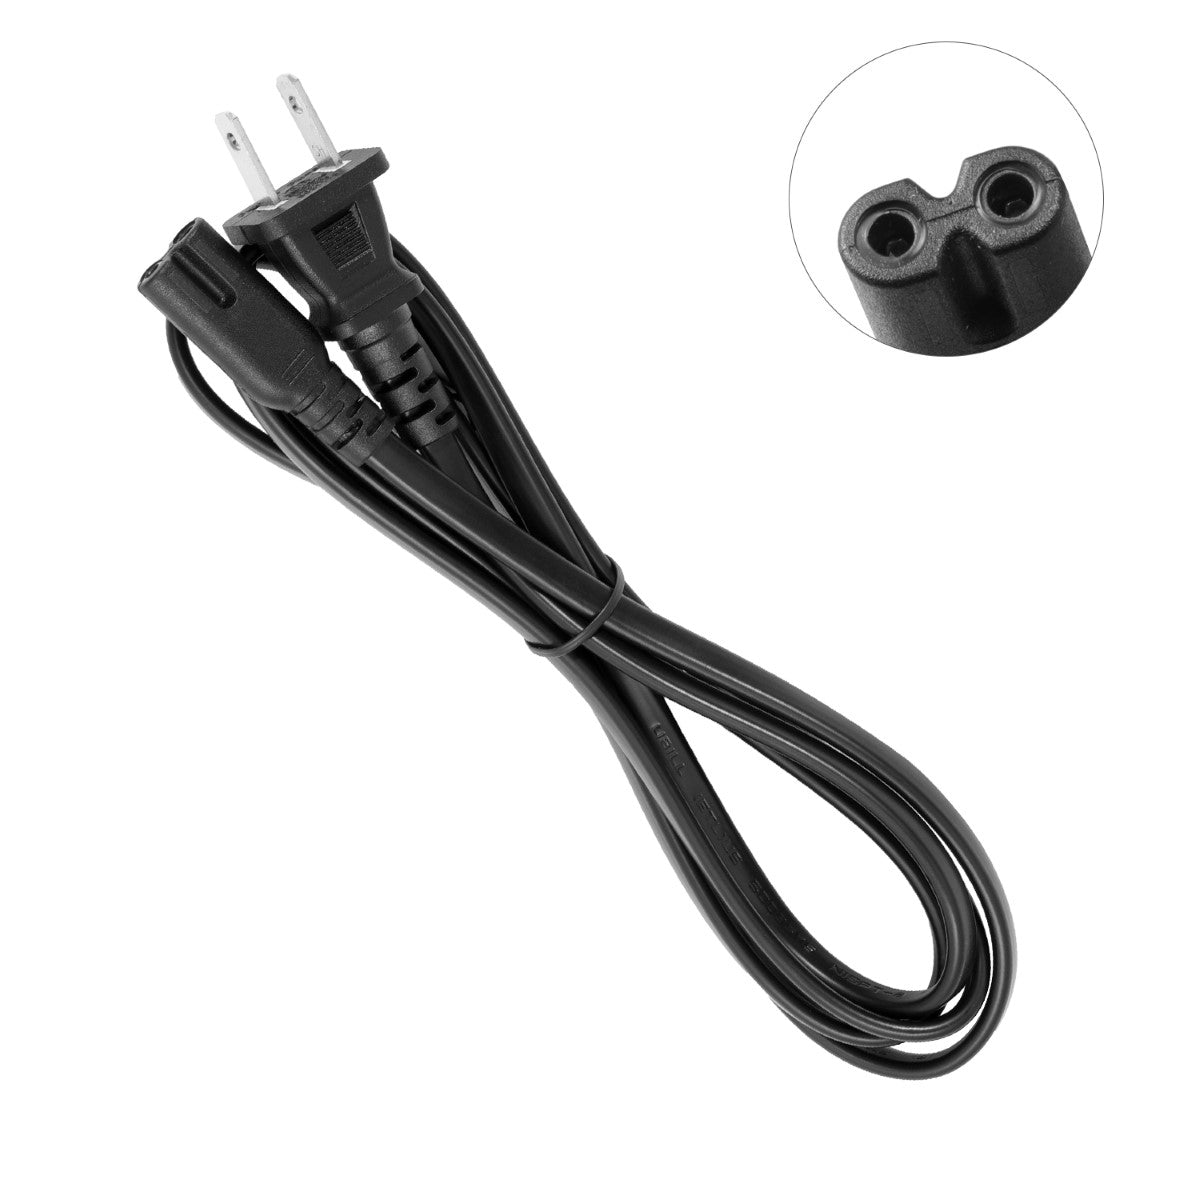 Power Cord for HP ENVY 4524 e-All-in-One Printer.